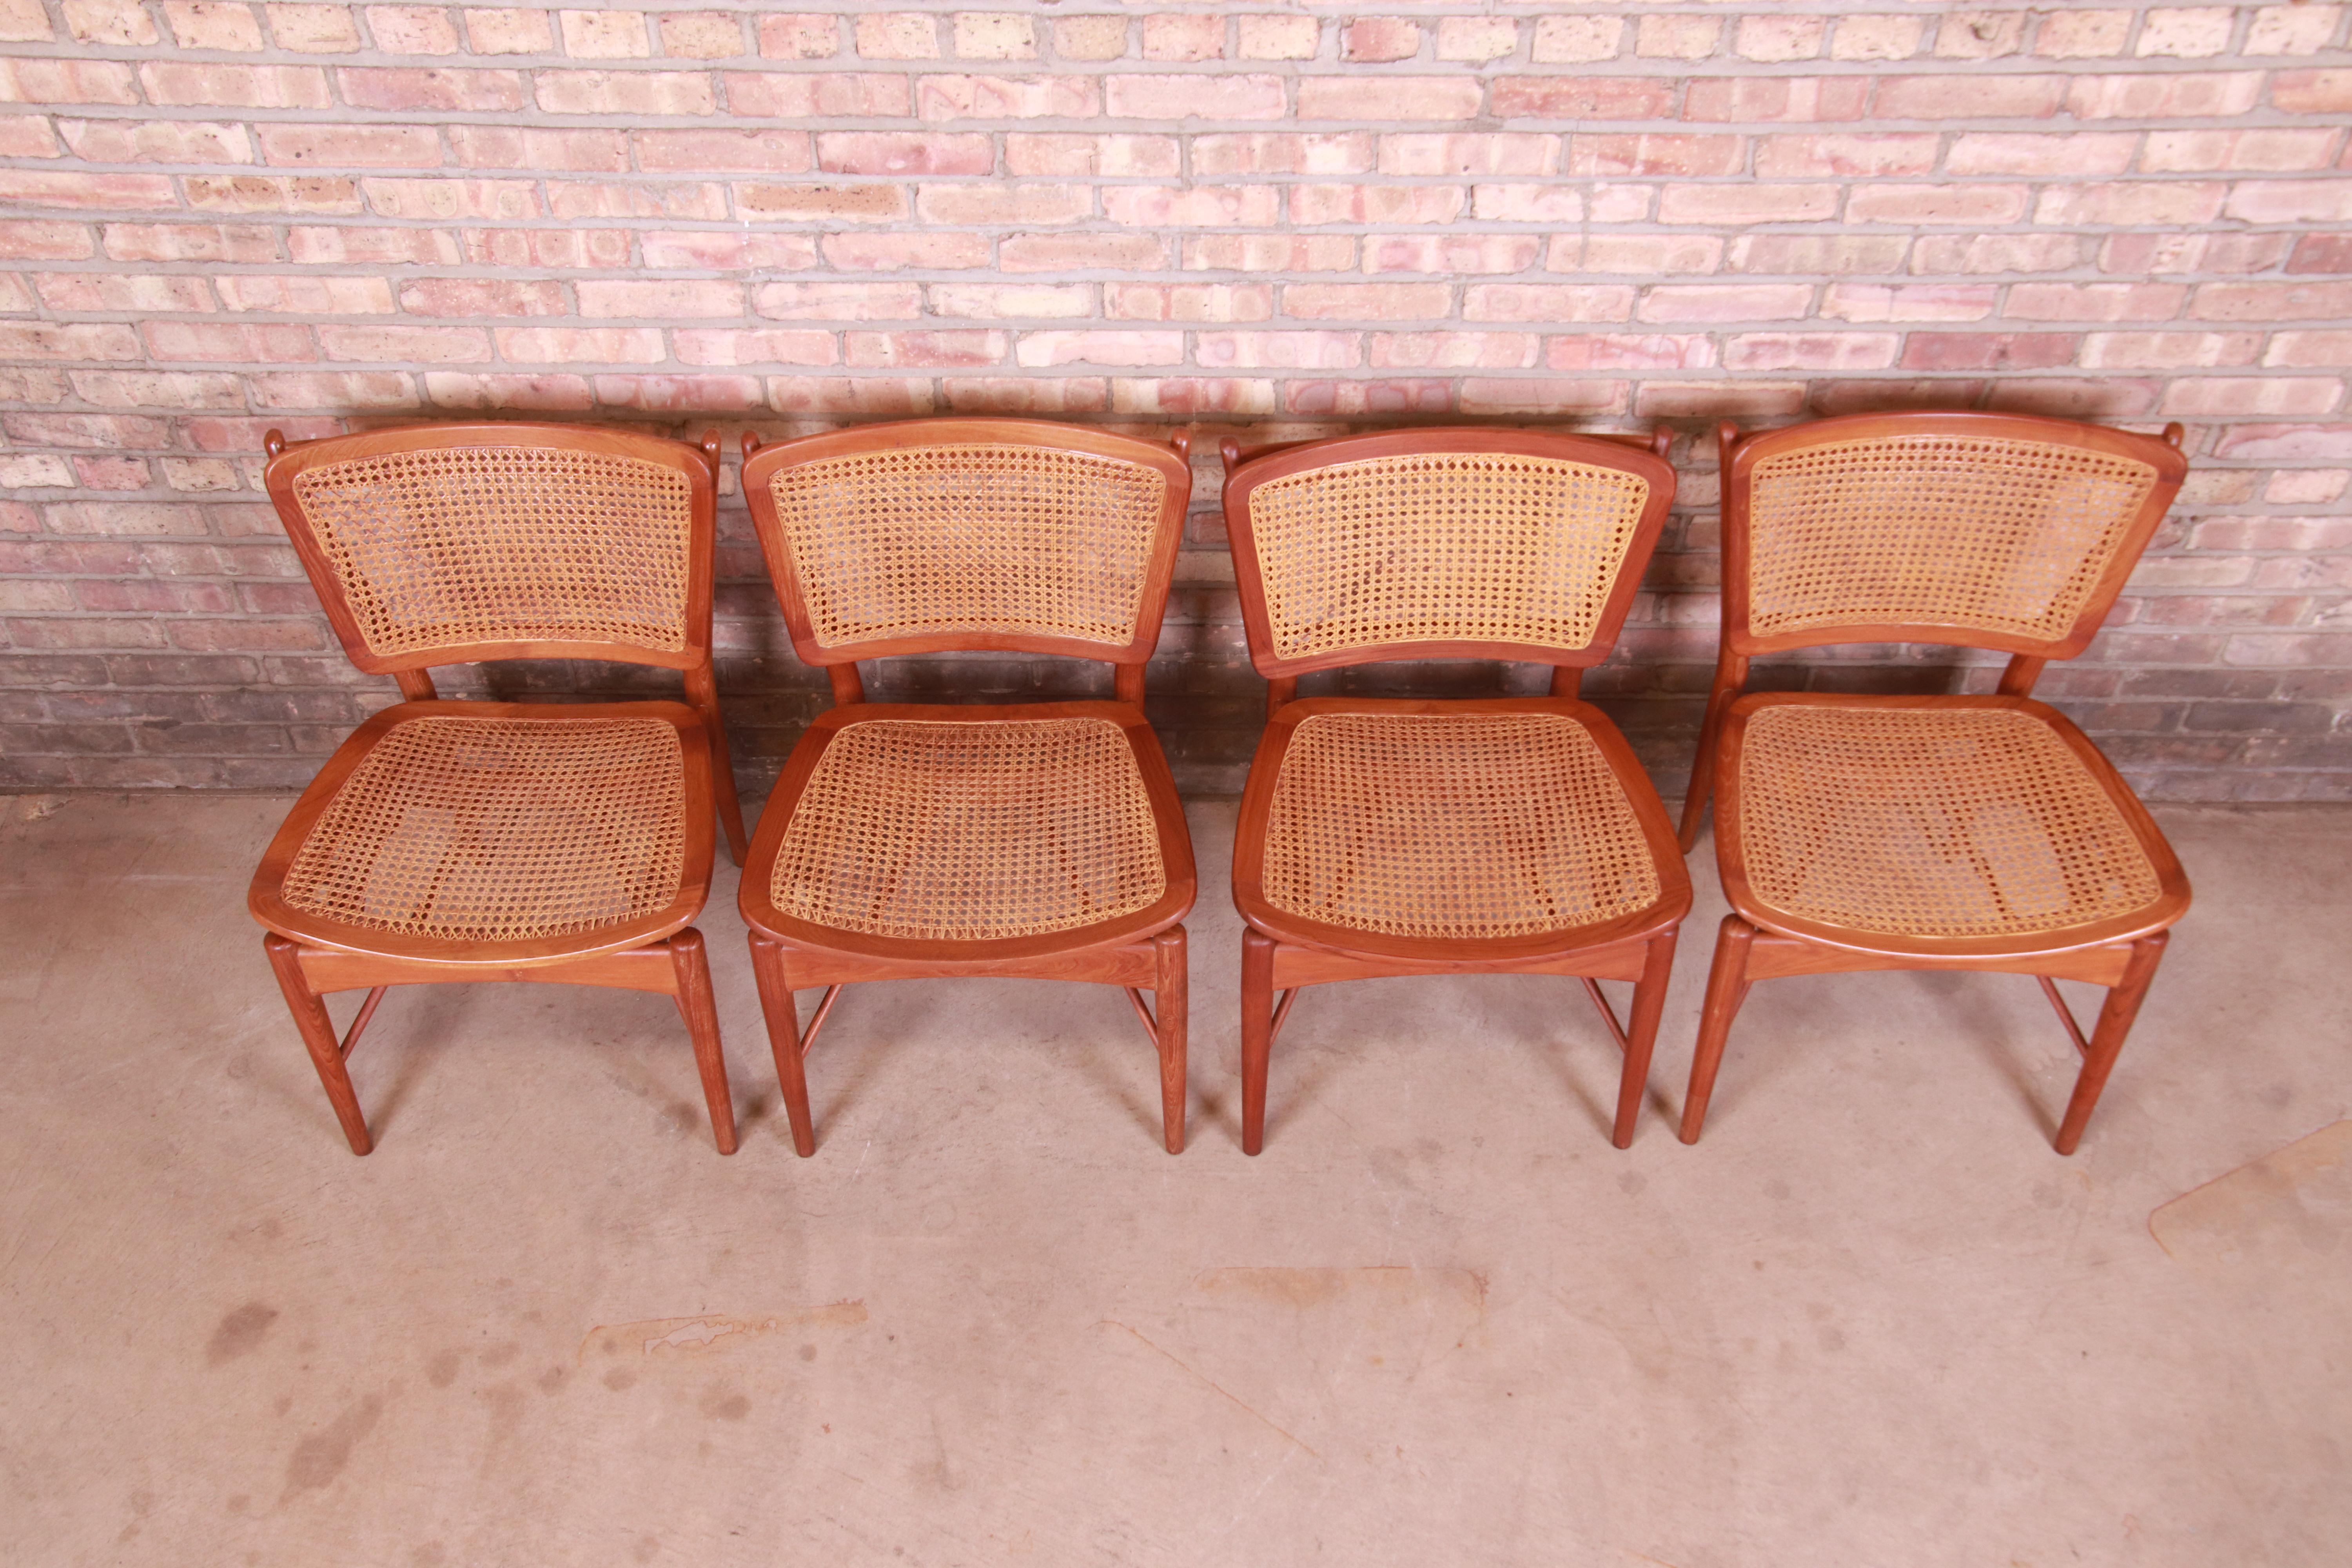 Mid-20th Century Finn Juhl for Baker Furniture Teak and Cane Dining Chairs, Set of Four For Sale